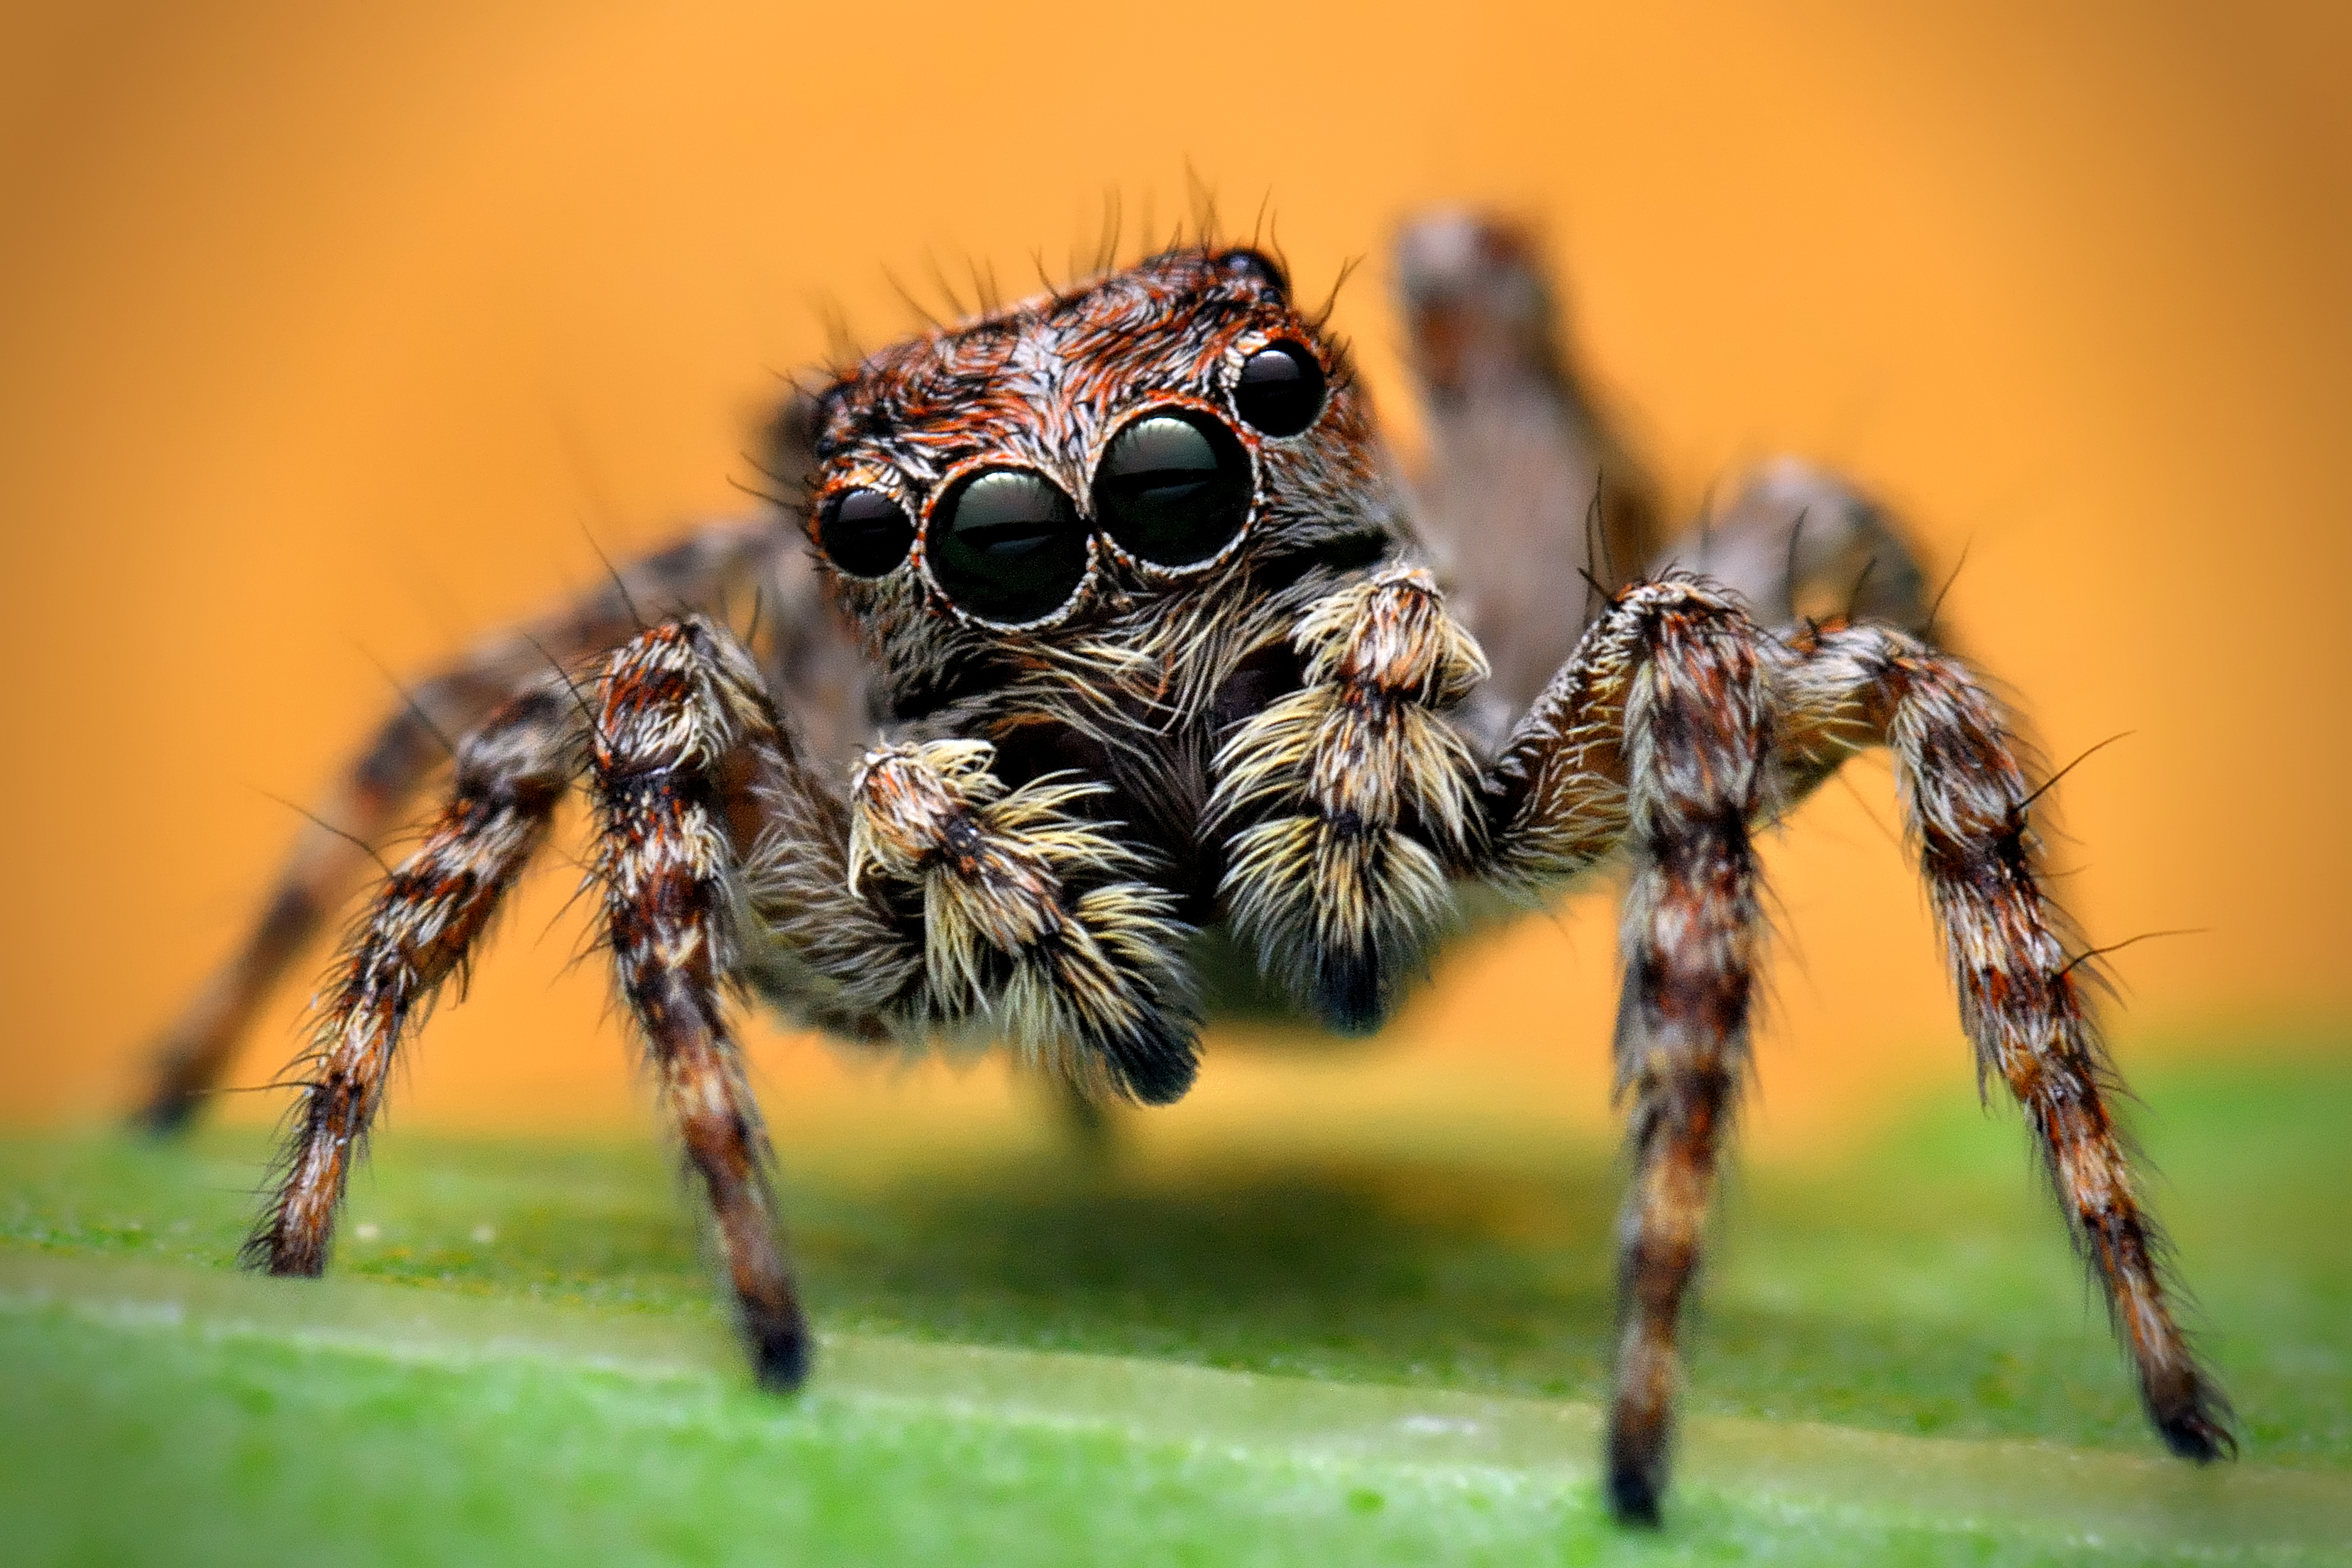 Spiders are much smarter than you think | Ars Technica